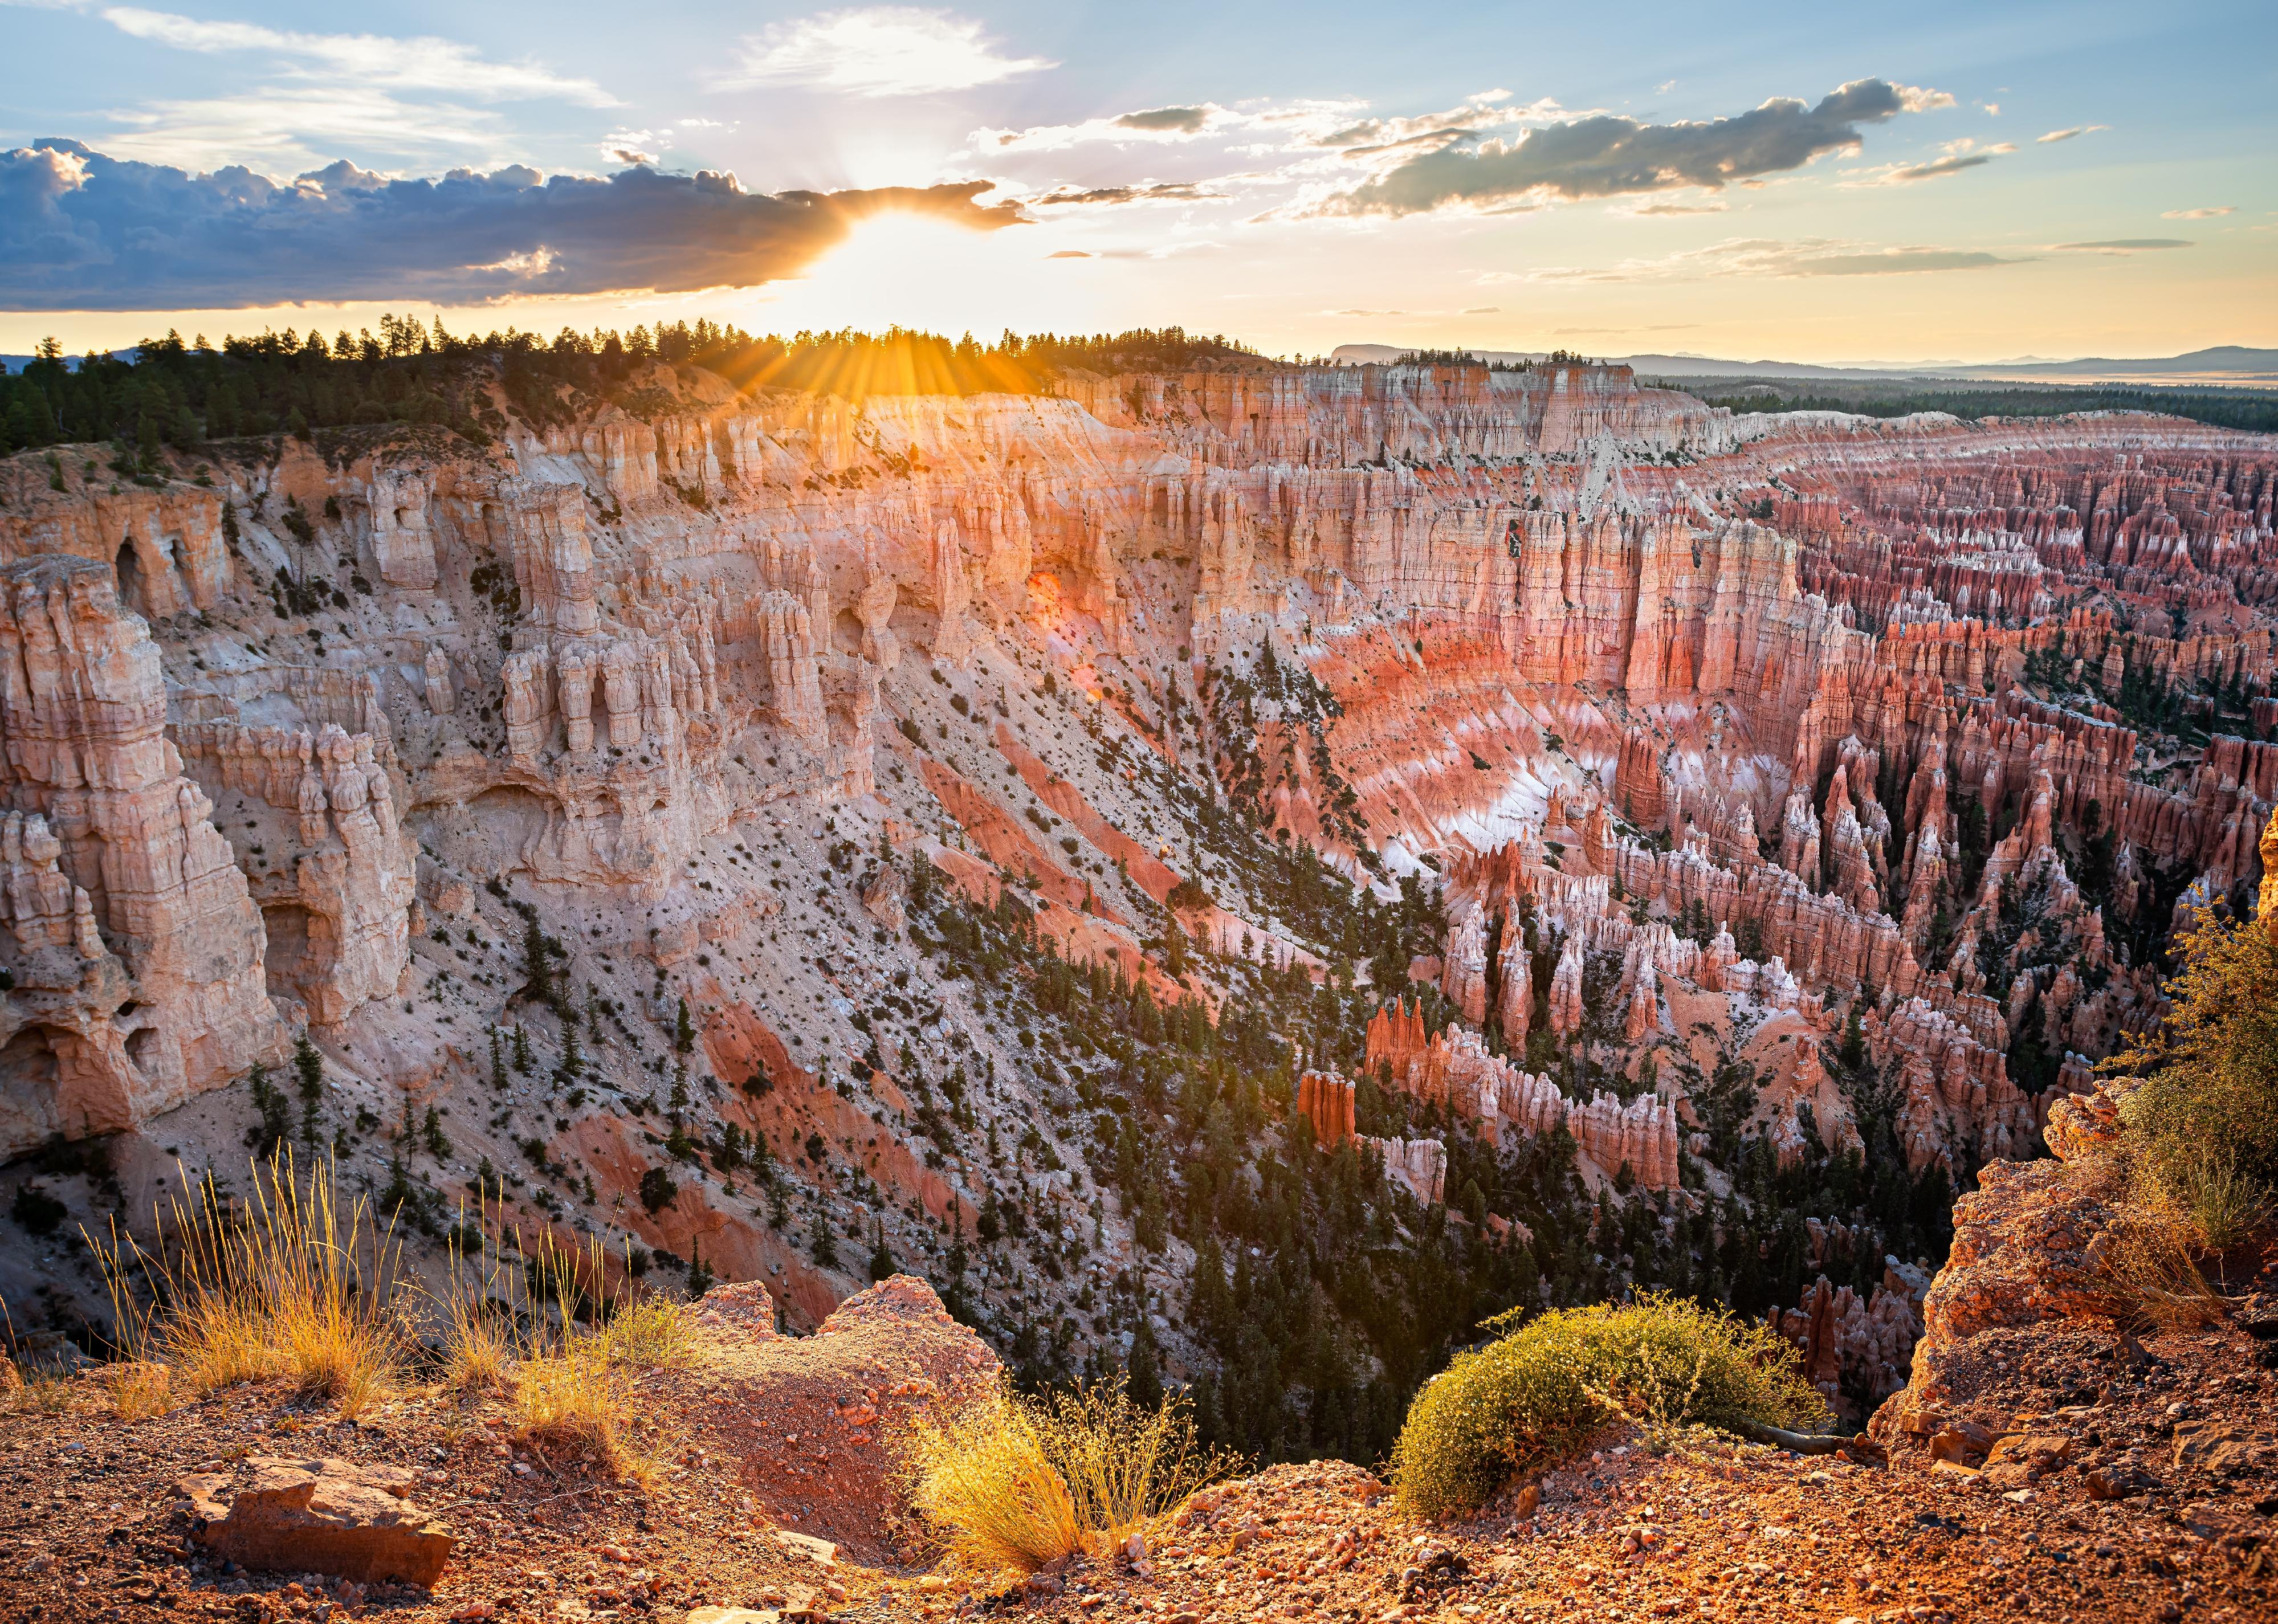 Panoramic view from Bryce Point overlook in Bryce Canyon National Park.